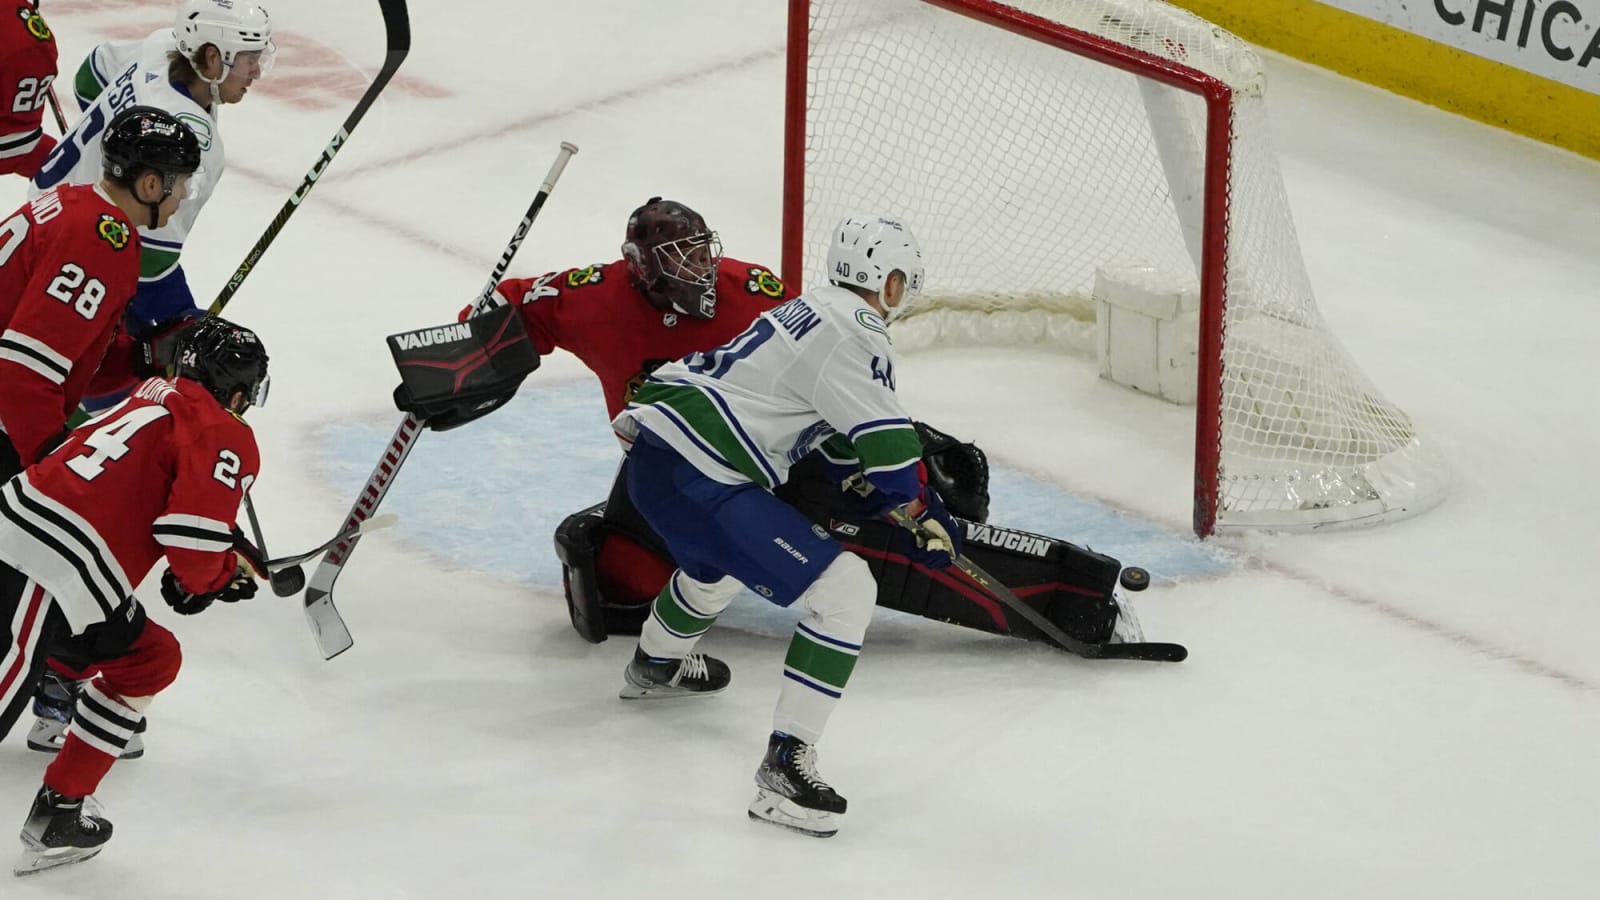  Elias Pettersson takes care of business for Canucks in Aidan McDonough’s NHL debut